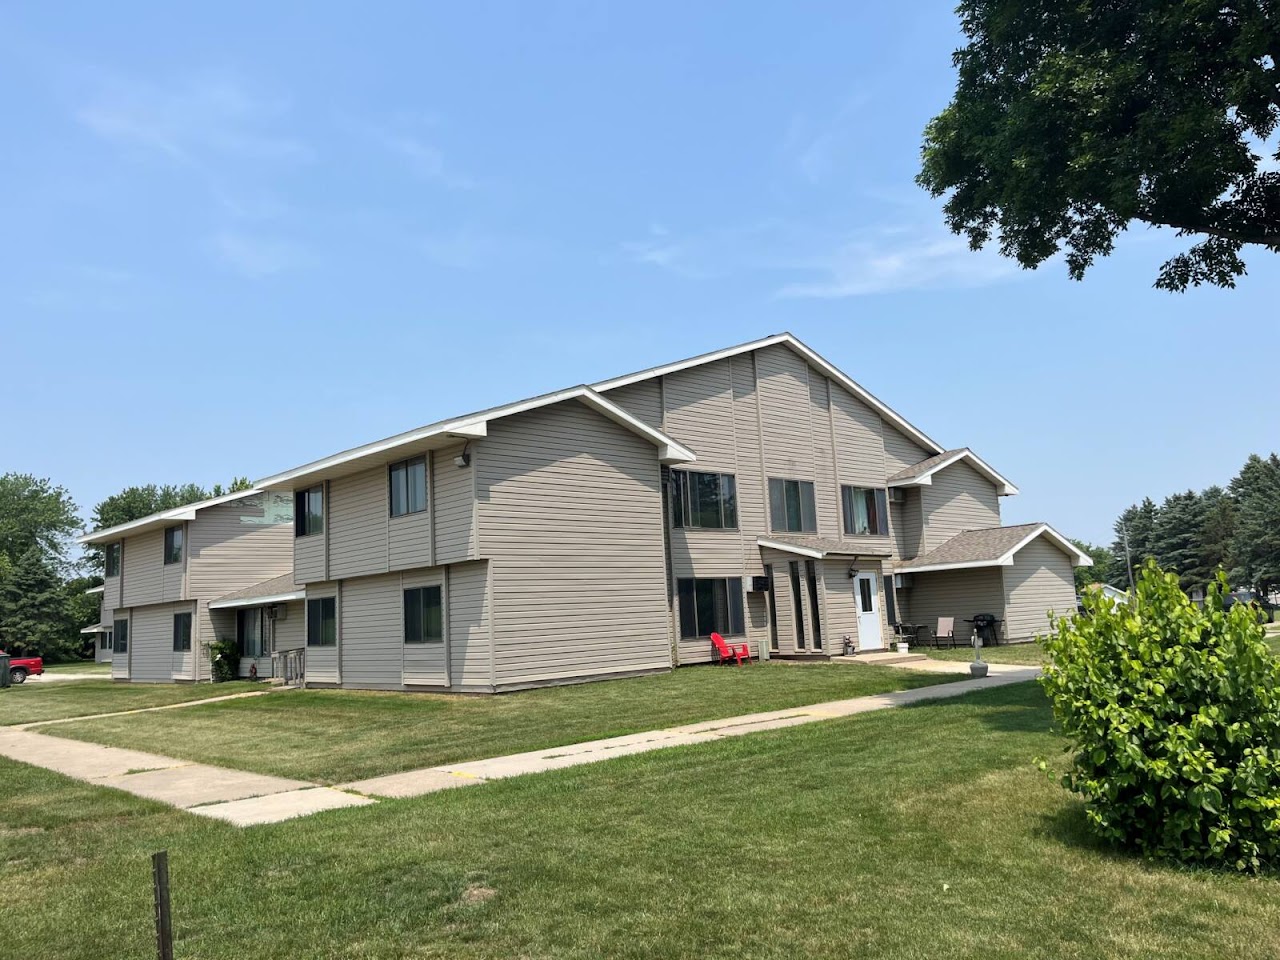 Photo of CIRCLE PINE APARTMENTS. Affordable housing located at 102 2ND AVE W BALATON, MN 56115